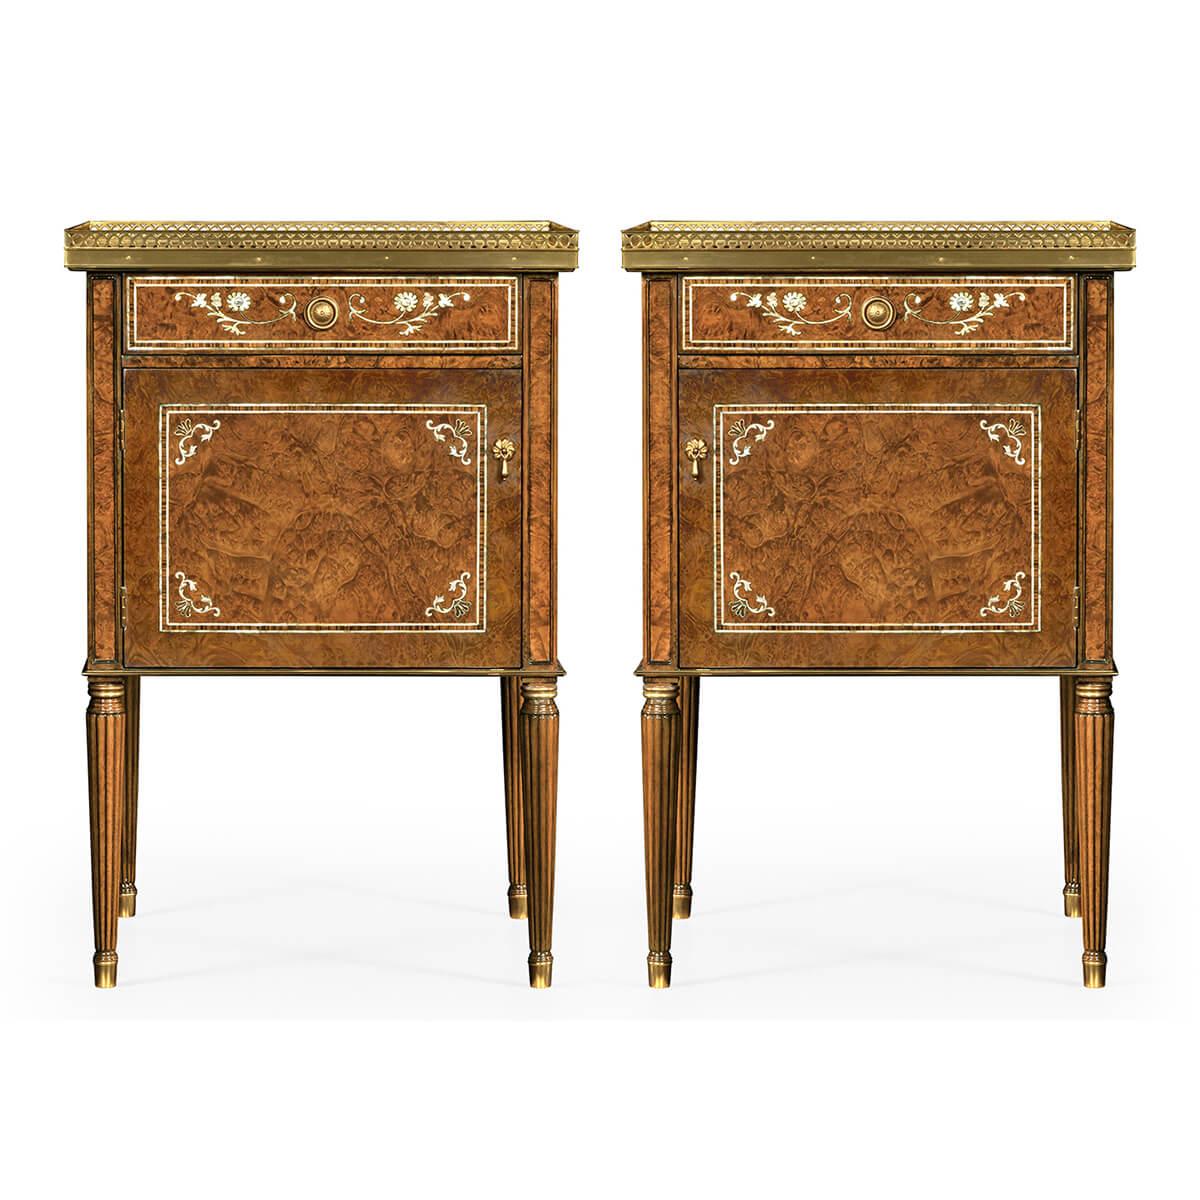 A pair of English Regency style bedside tables with burl veneers, mother of pearl inlays, a pierced brass gallery, each table with a single drawer above a cupboard door, with oak secondary woods, and raised on turned, reeded, and tapered